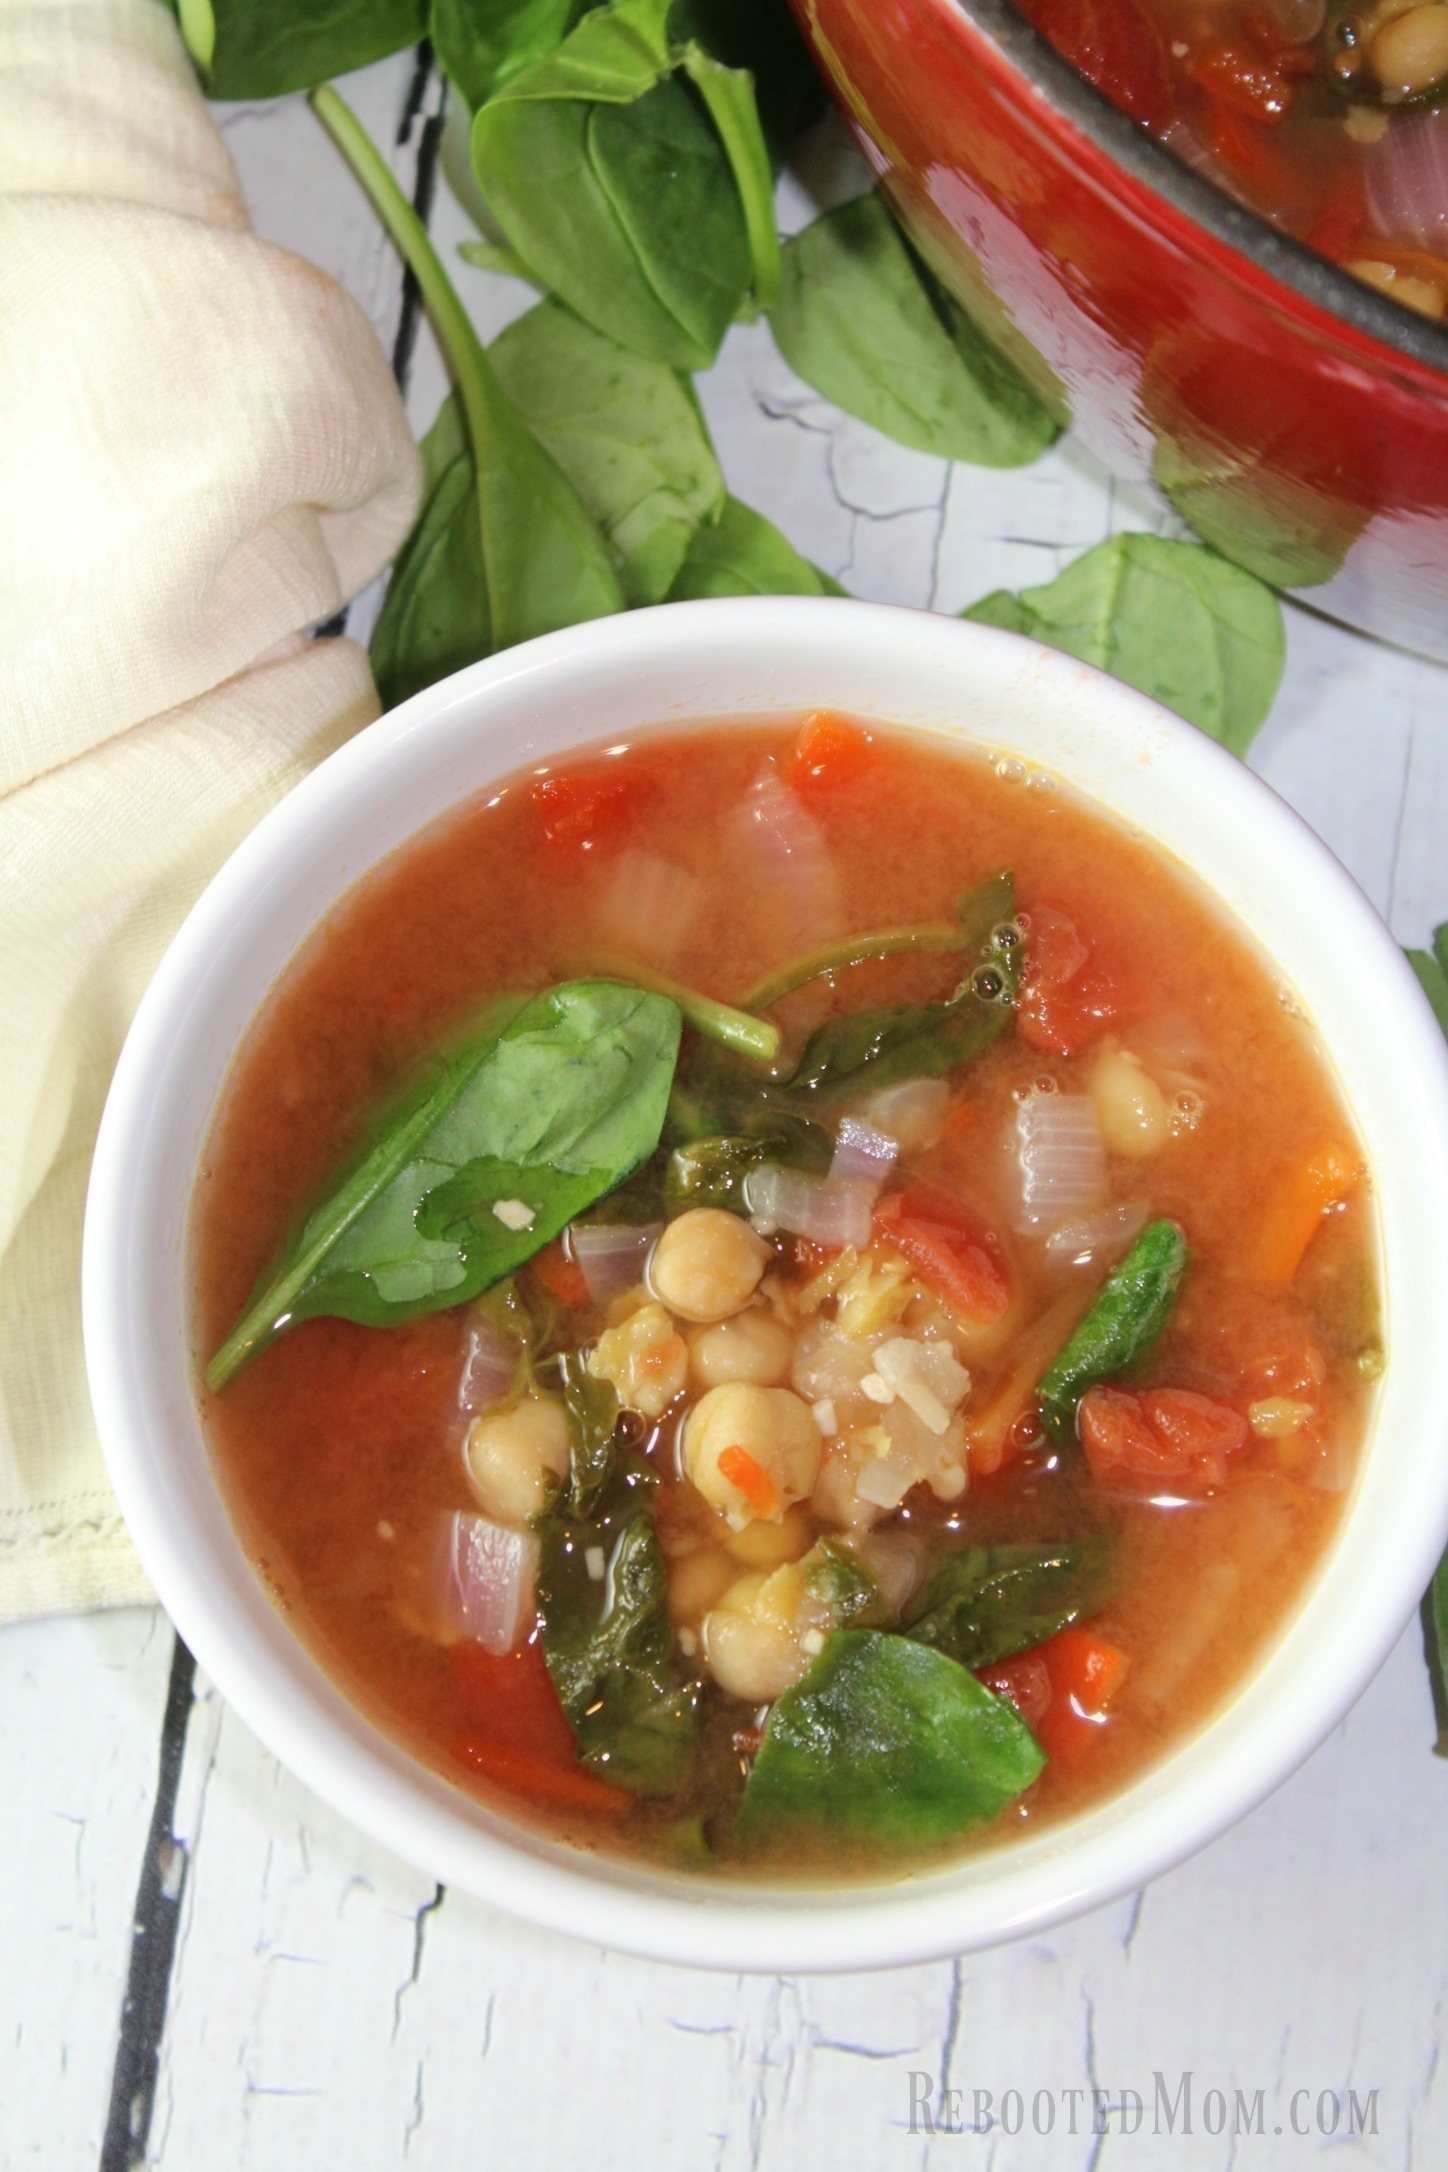 A hearty italian chickpea soup that absorbs the flavors of onion, garlic, roasted red peppers in a flavorful vegetable broth.